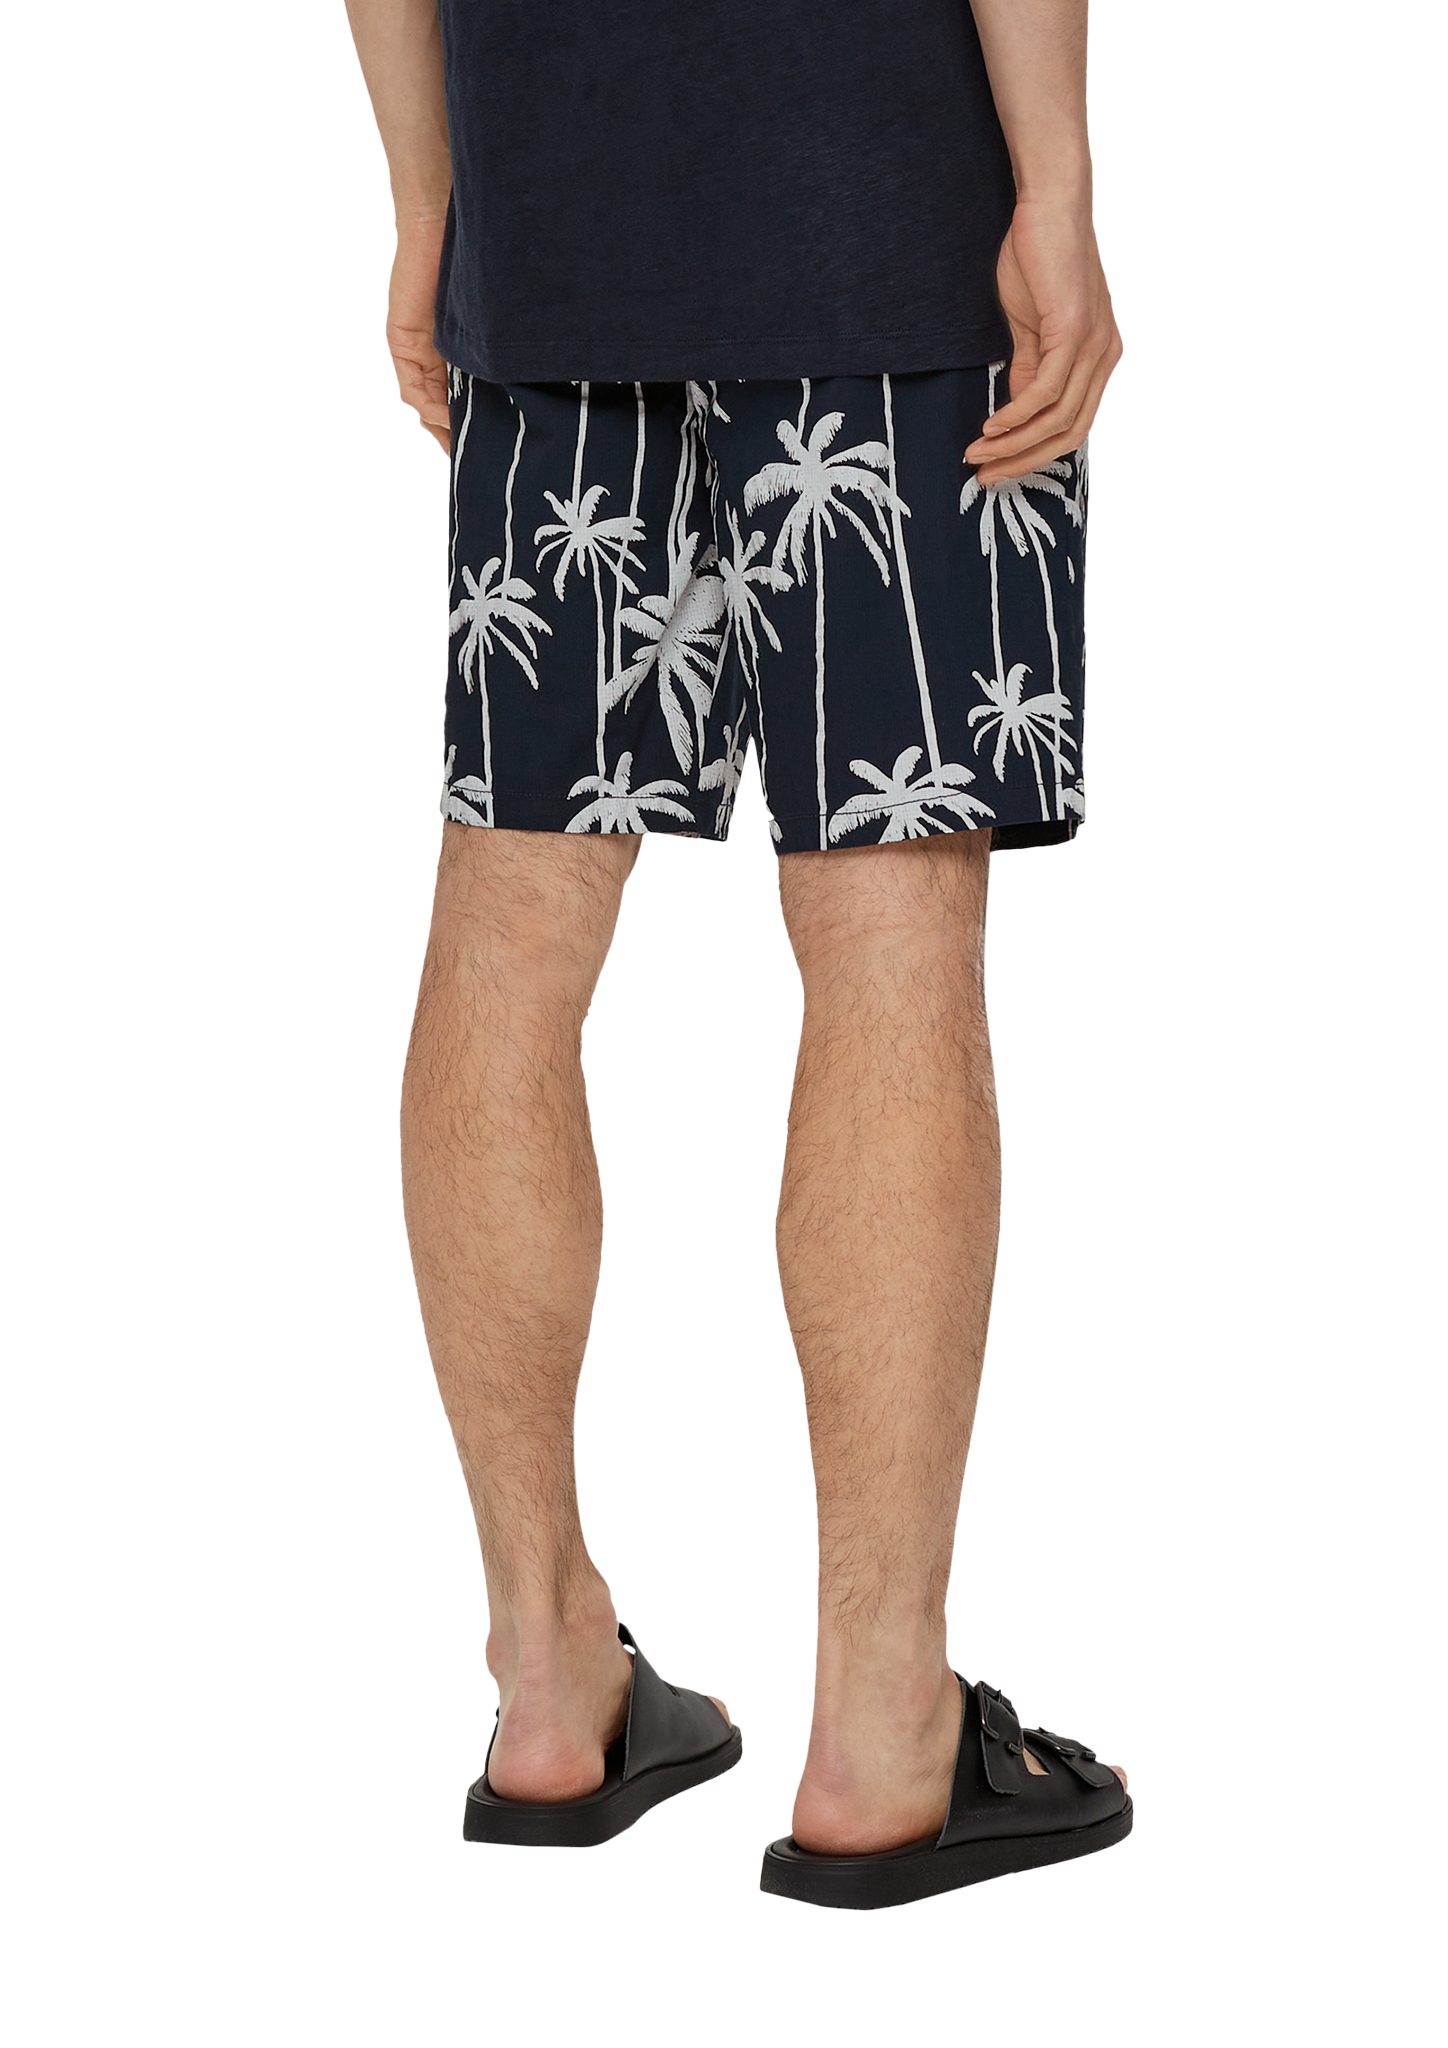 mit Jogger s.Oliver Relaxed: All-over-Print Bermudas navy Durchzugkordel